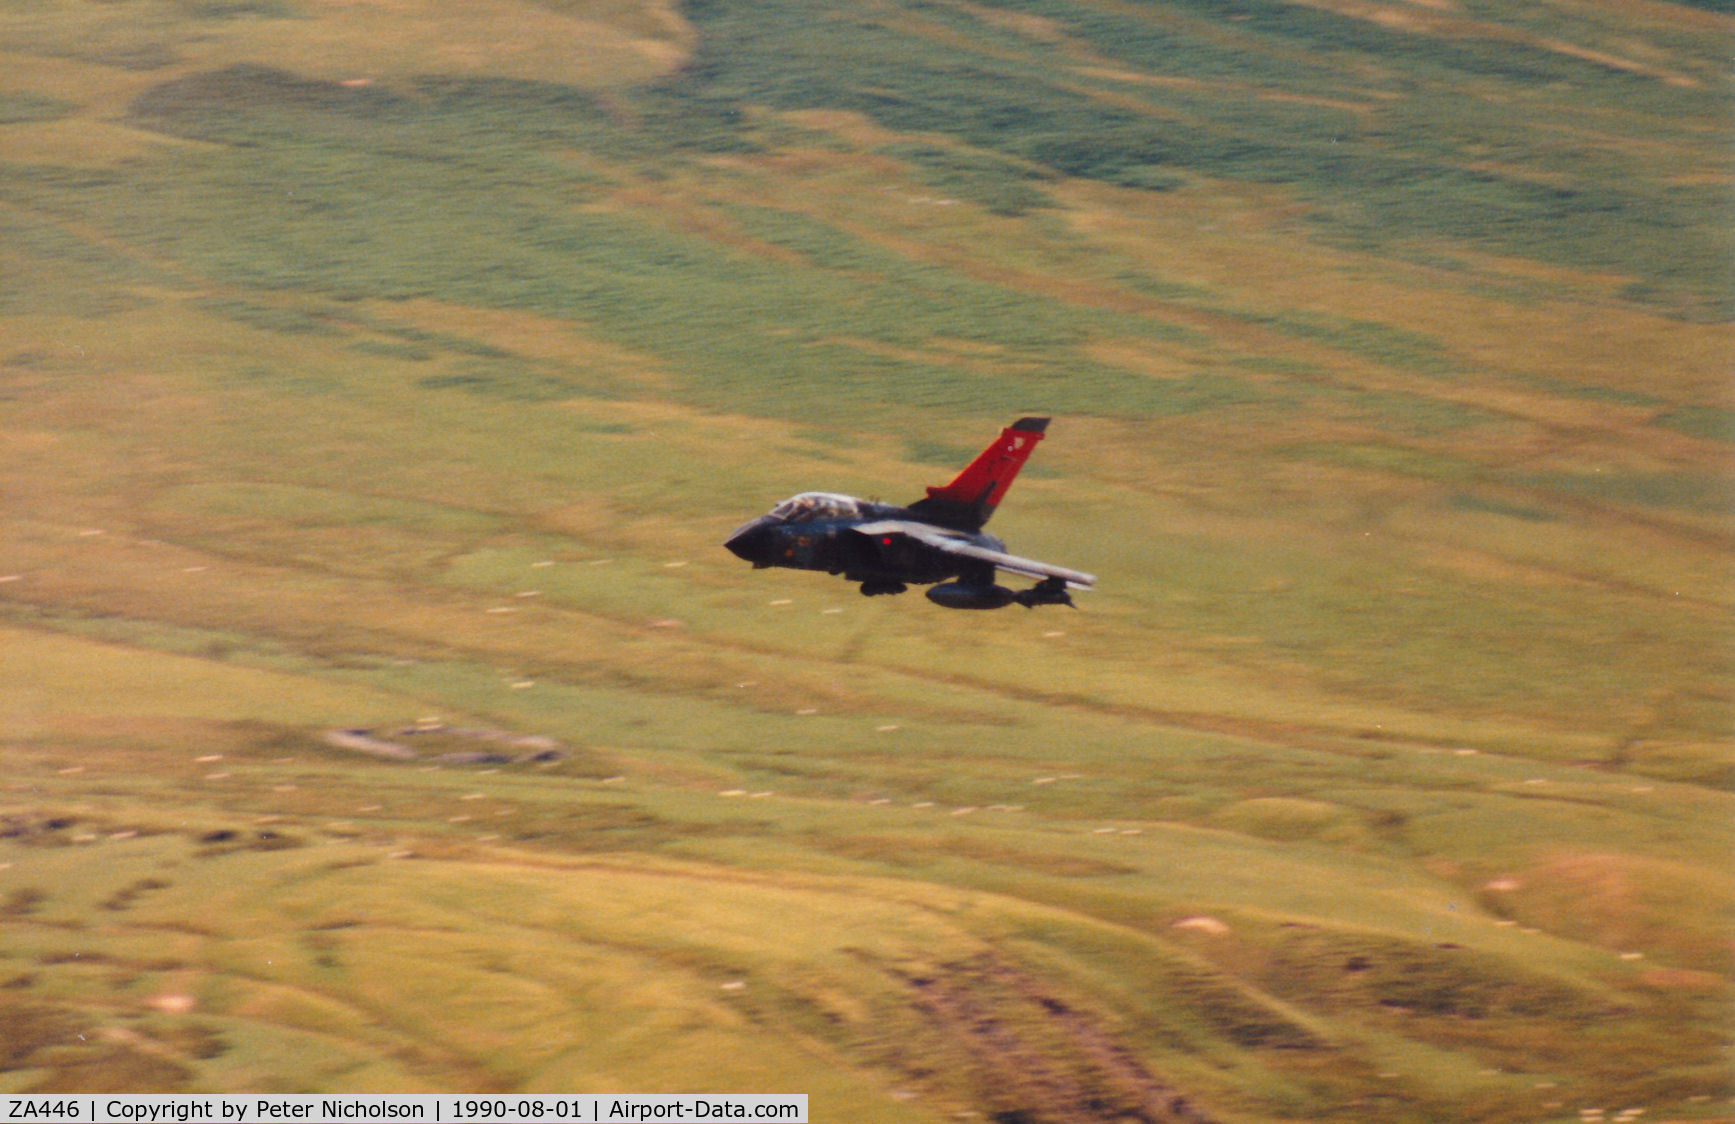 ZA446, 1983 Panavia Tornado GR.1 C/N 234/BS076/3112, Tornado GR.1 of 15 Squadron then based at RAF Bruggen, with high-conspicuity tail markings, departing Otterburn Range on a Mallet Blow mission in August 1990.